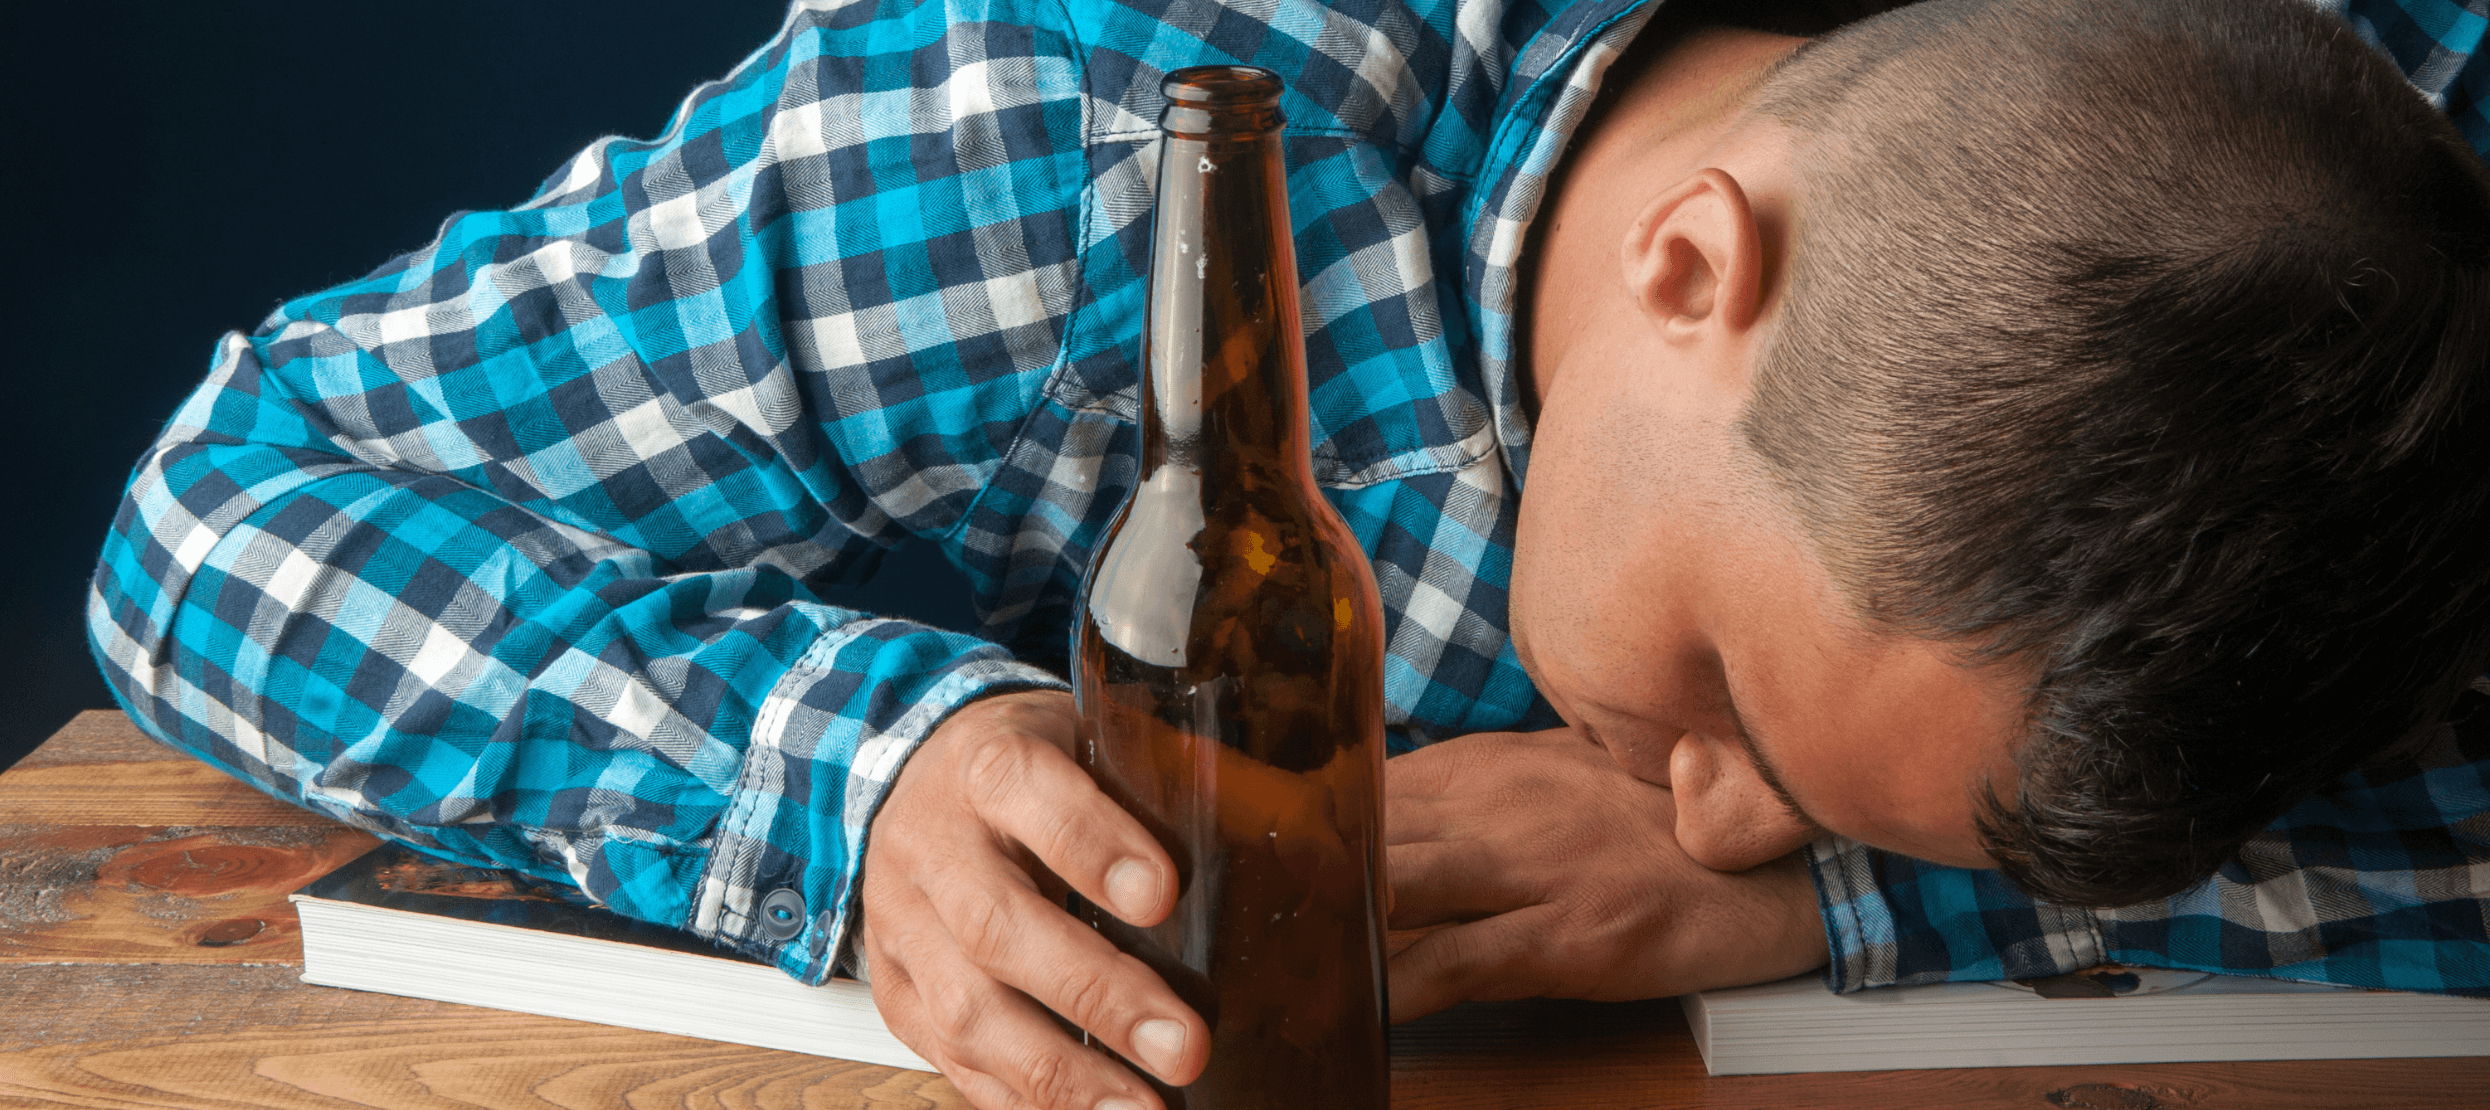 How to Recognize and Address Substance Misuse on Campus